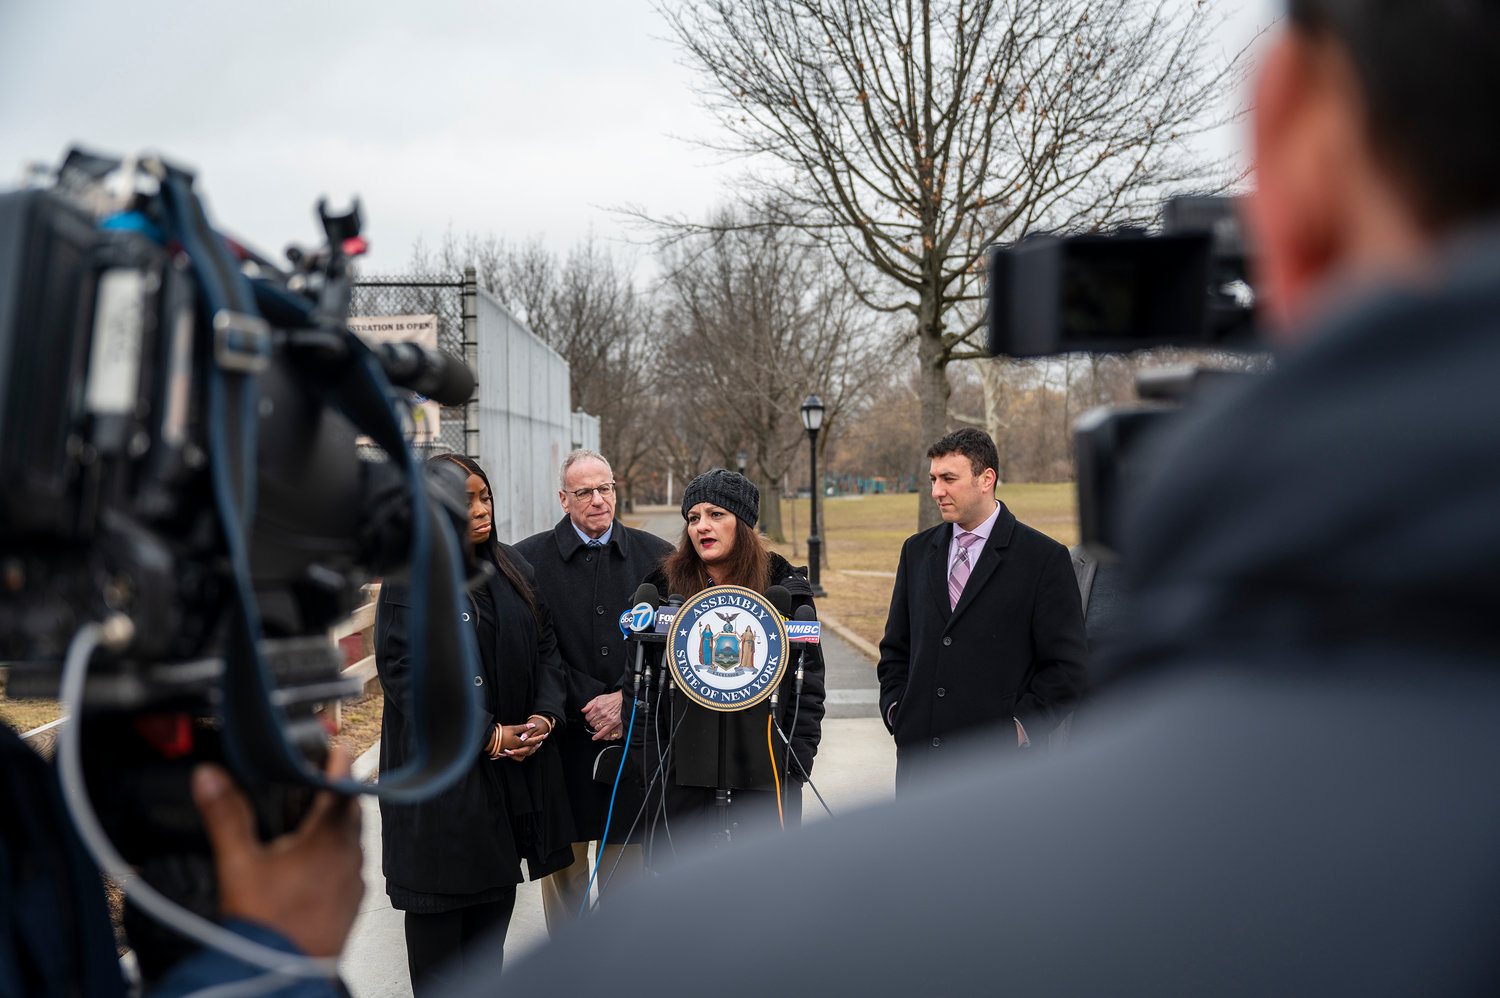 Words are important, says Mehnaz Afridi, director of The Holocaust, Genocide and Interfaith Education Center at Manhattan College. She joined Assemblyman Jeffrey Dinowitz and his son, Councilman Eric Dinowitz, along with Bronx borough president Vanessa Gibson at Seton Park on Tuesday to decry recent hate-based vandalism.